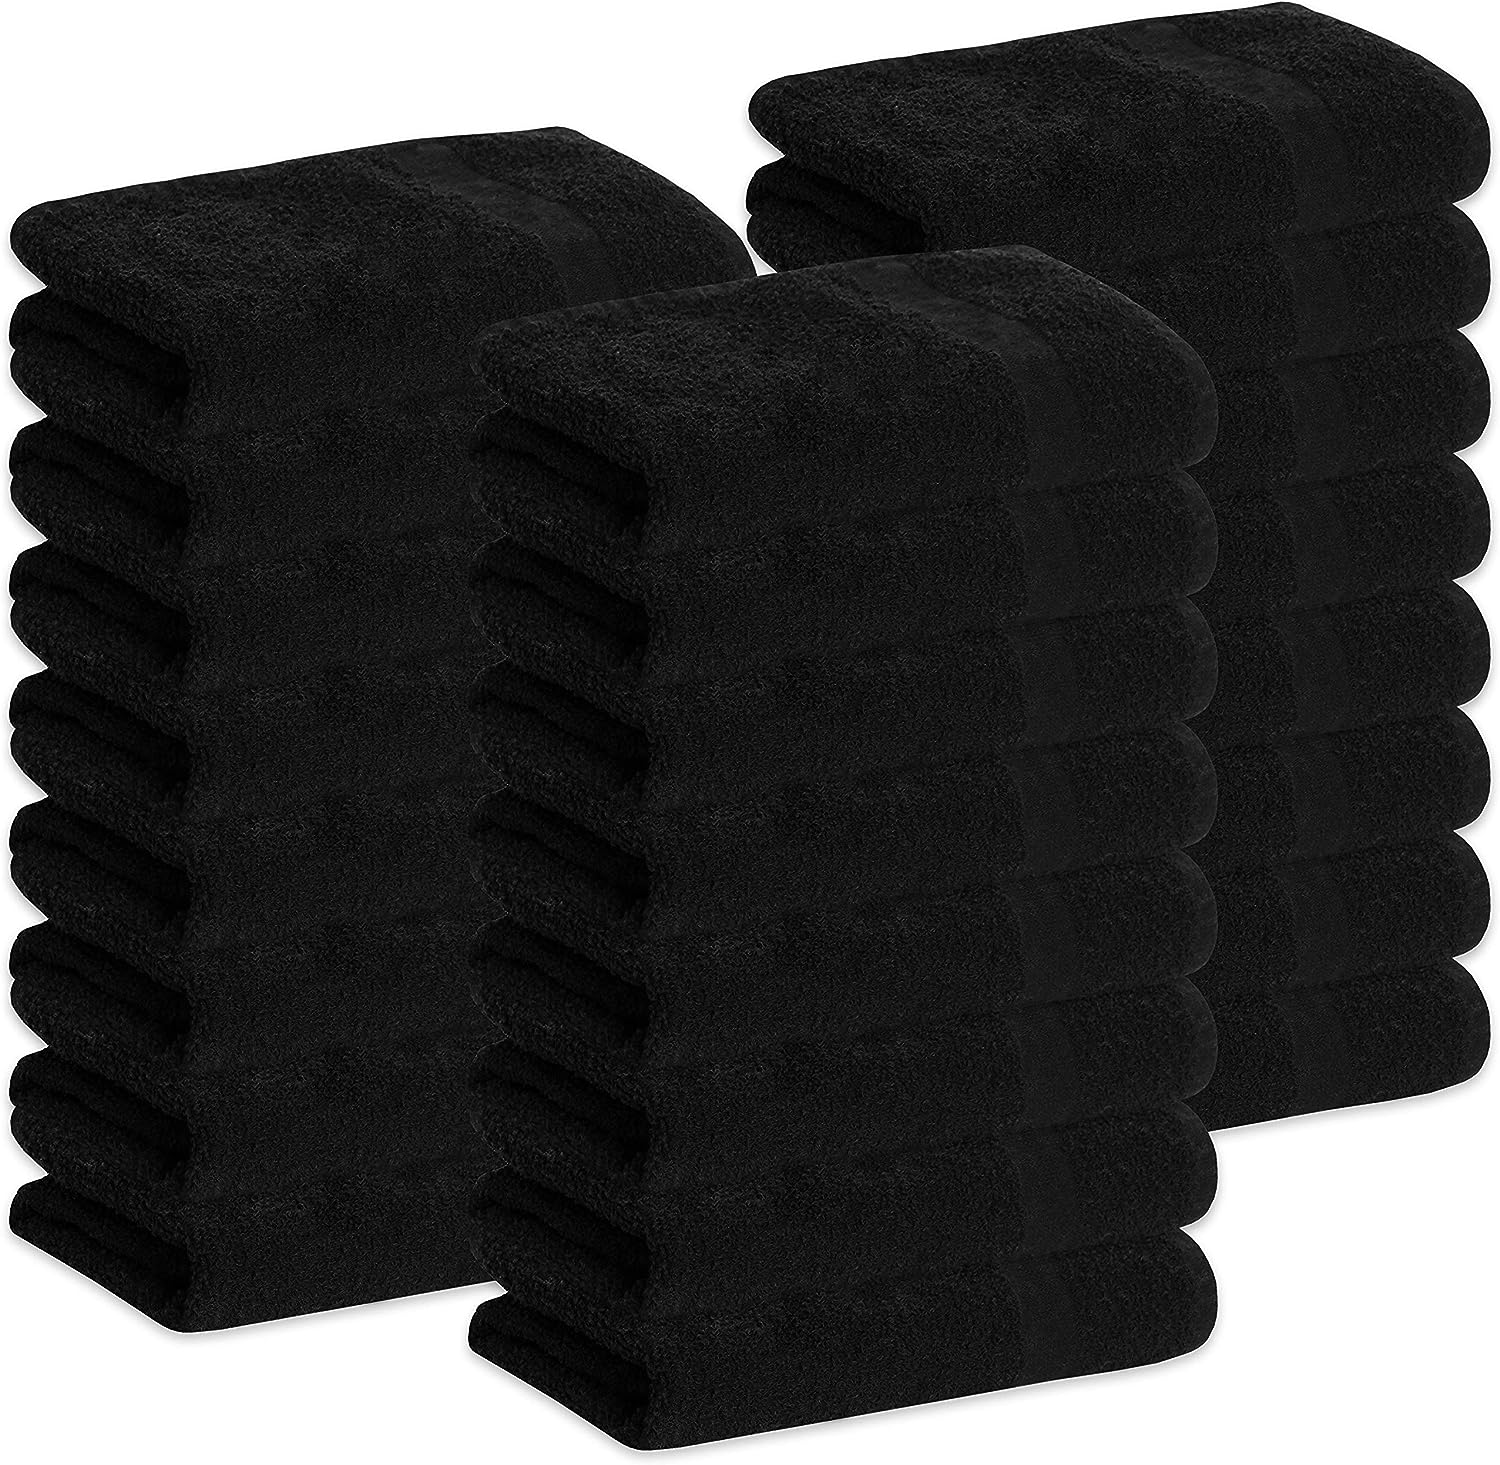 GREEN LIFESTYLE Black Bleach Proof Towels